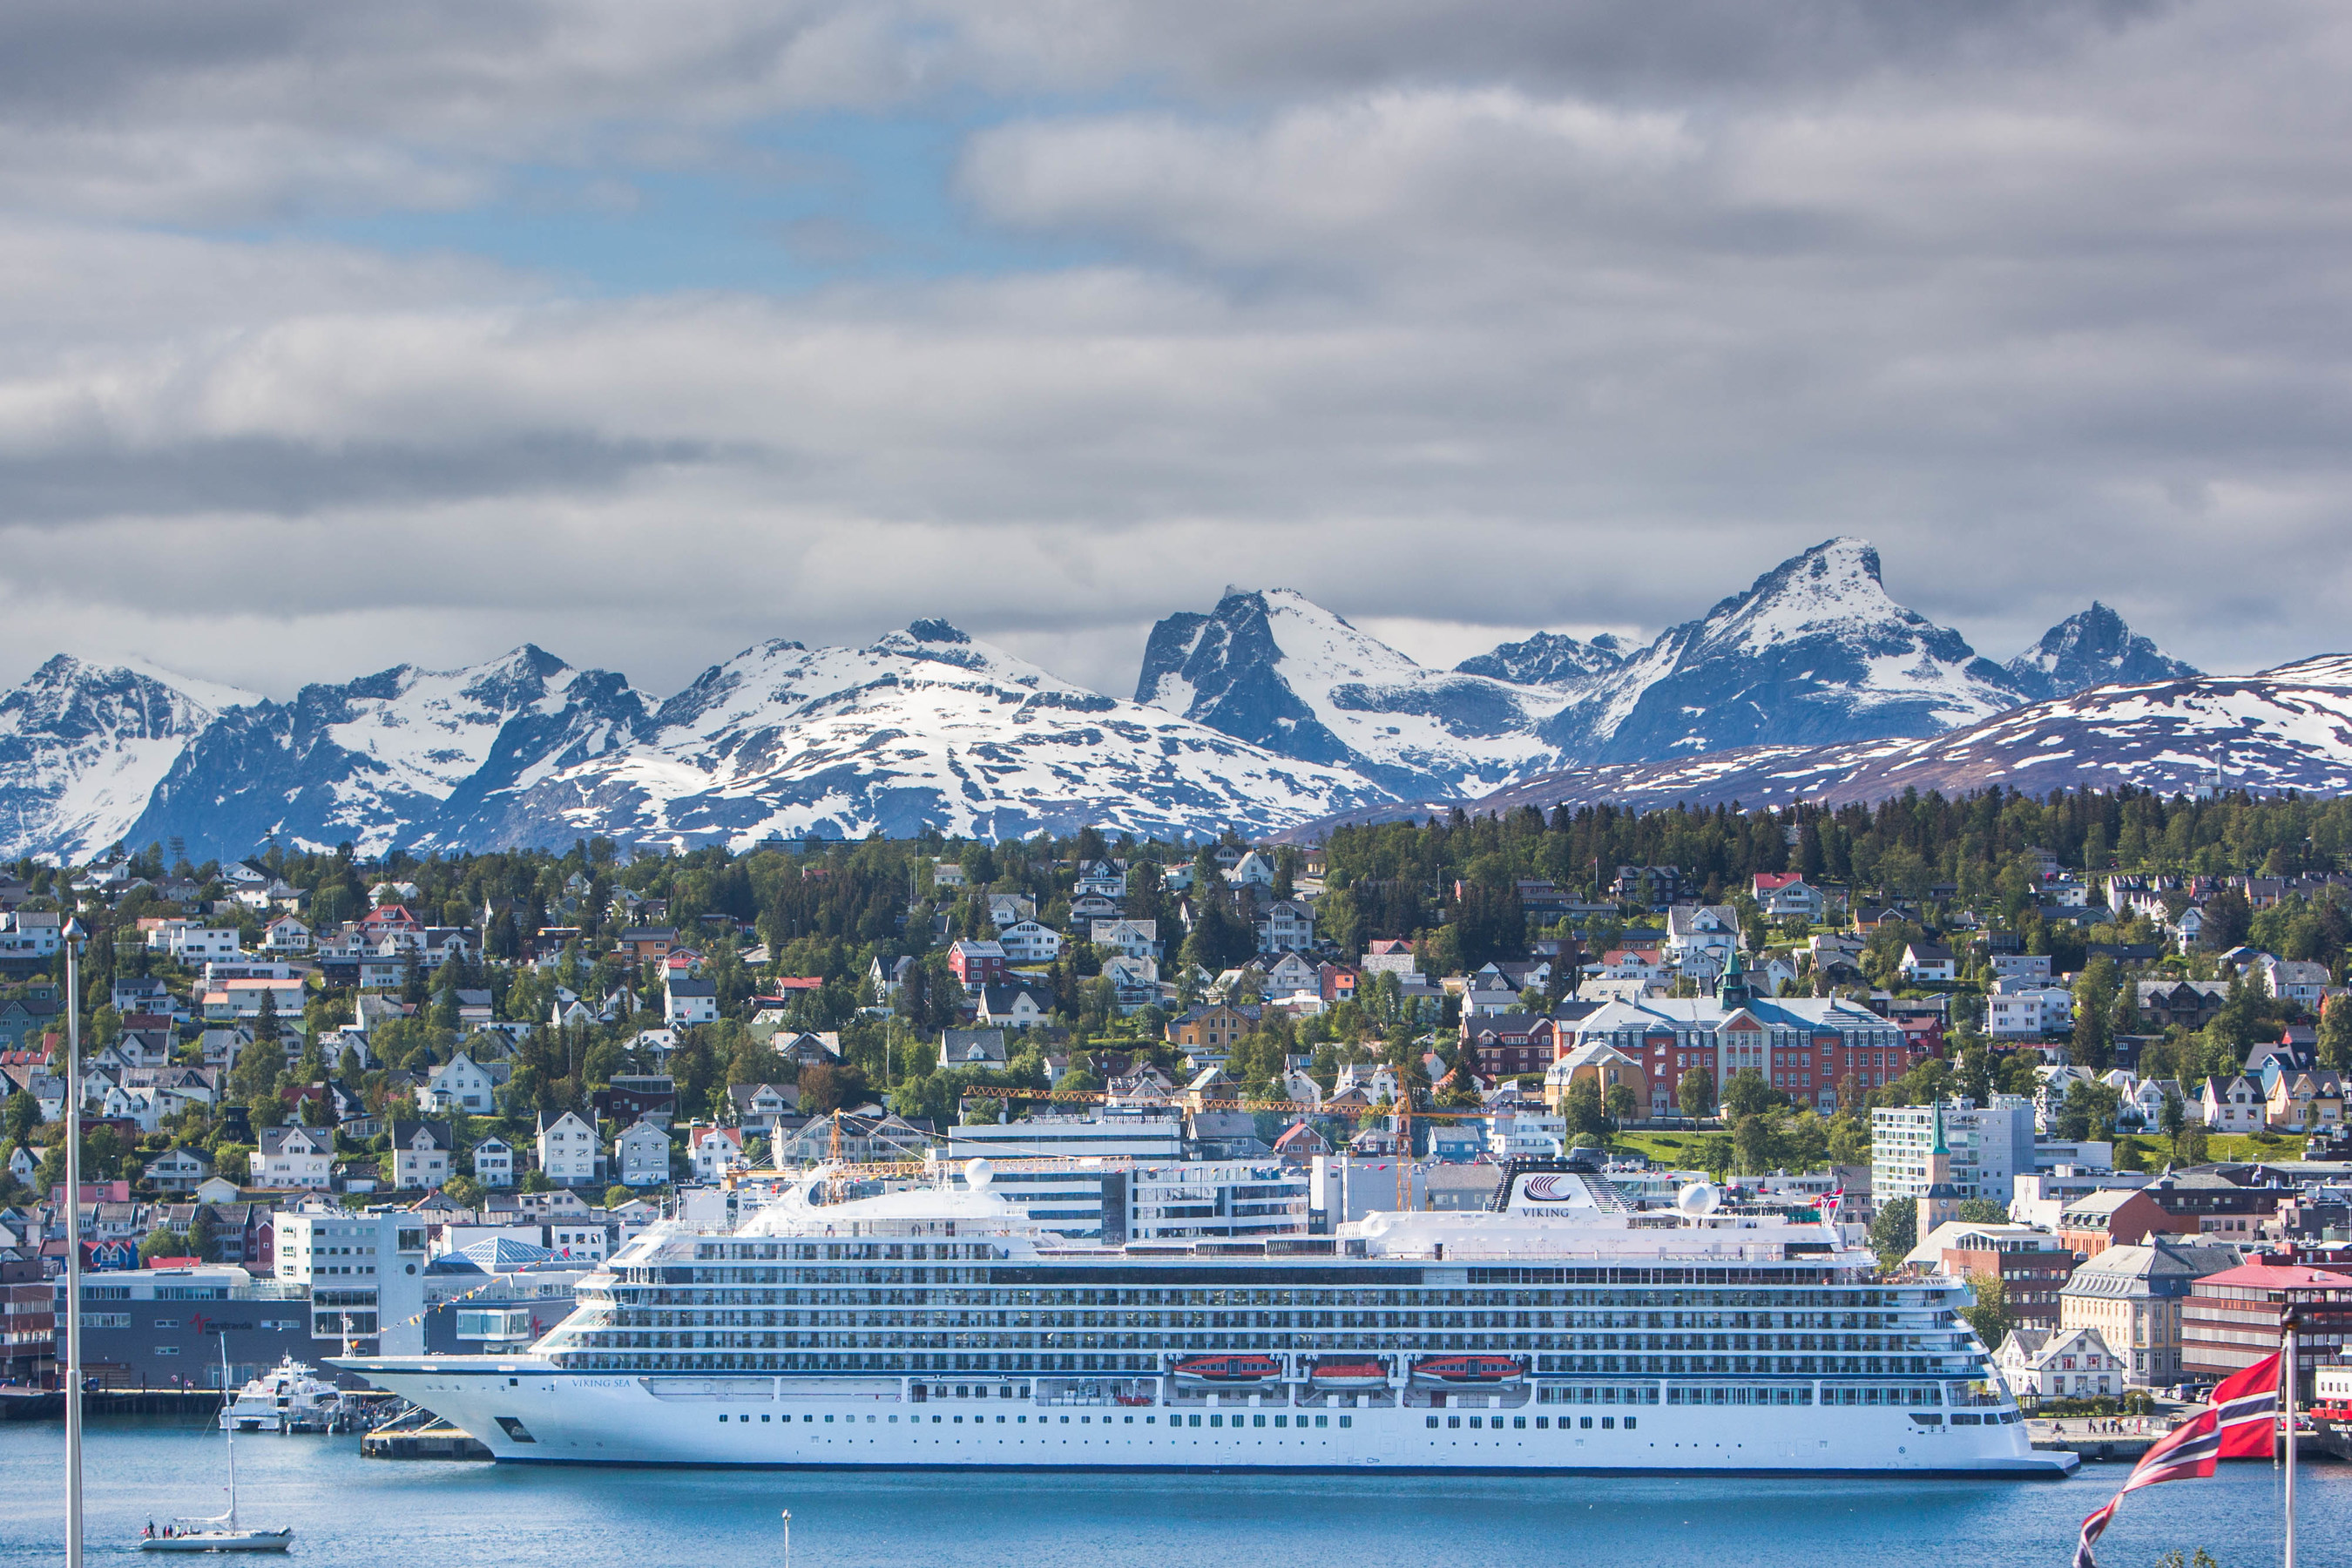 The new 930-passenger Viking Sea, docked in Tromso, Norway on the first sailing of Viking's new "Into the Midnight Sun" itinerary that cruises between London and Bergen, Norway. (Credit: Yngve Olsen Saebbe/Nordlys)